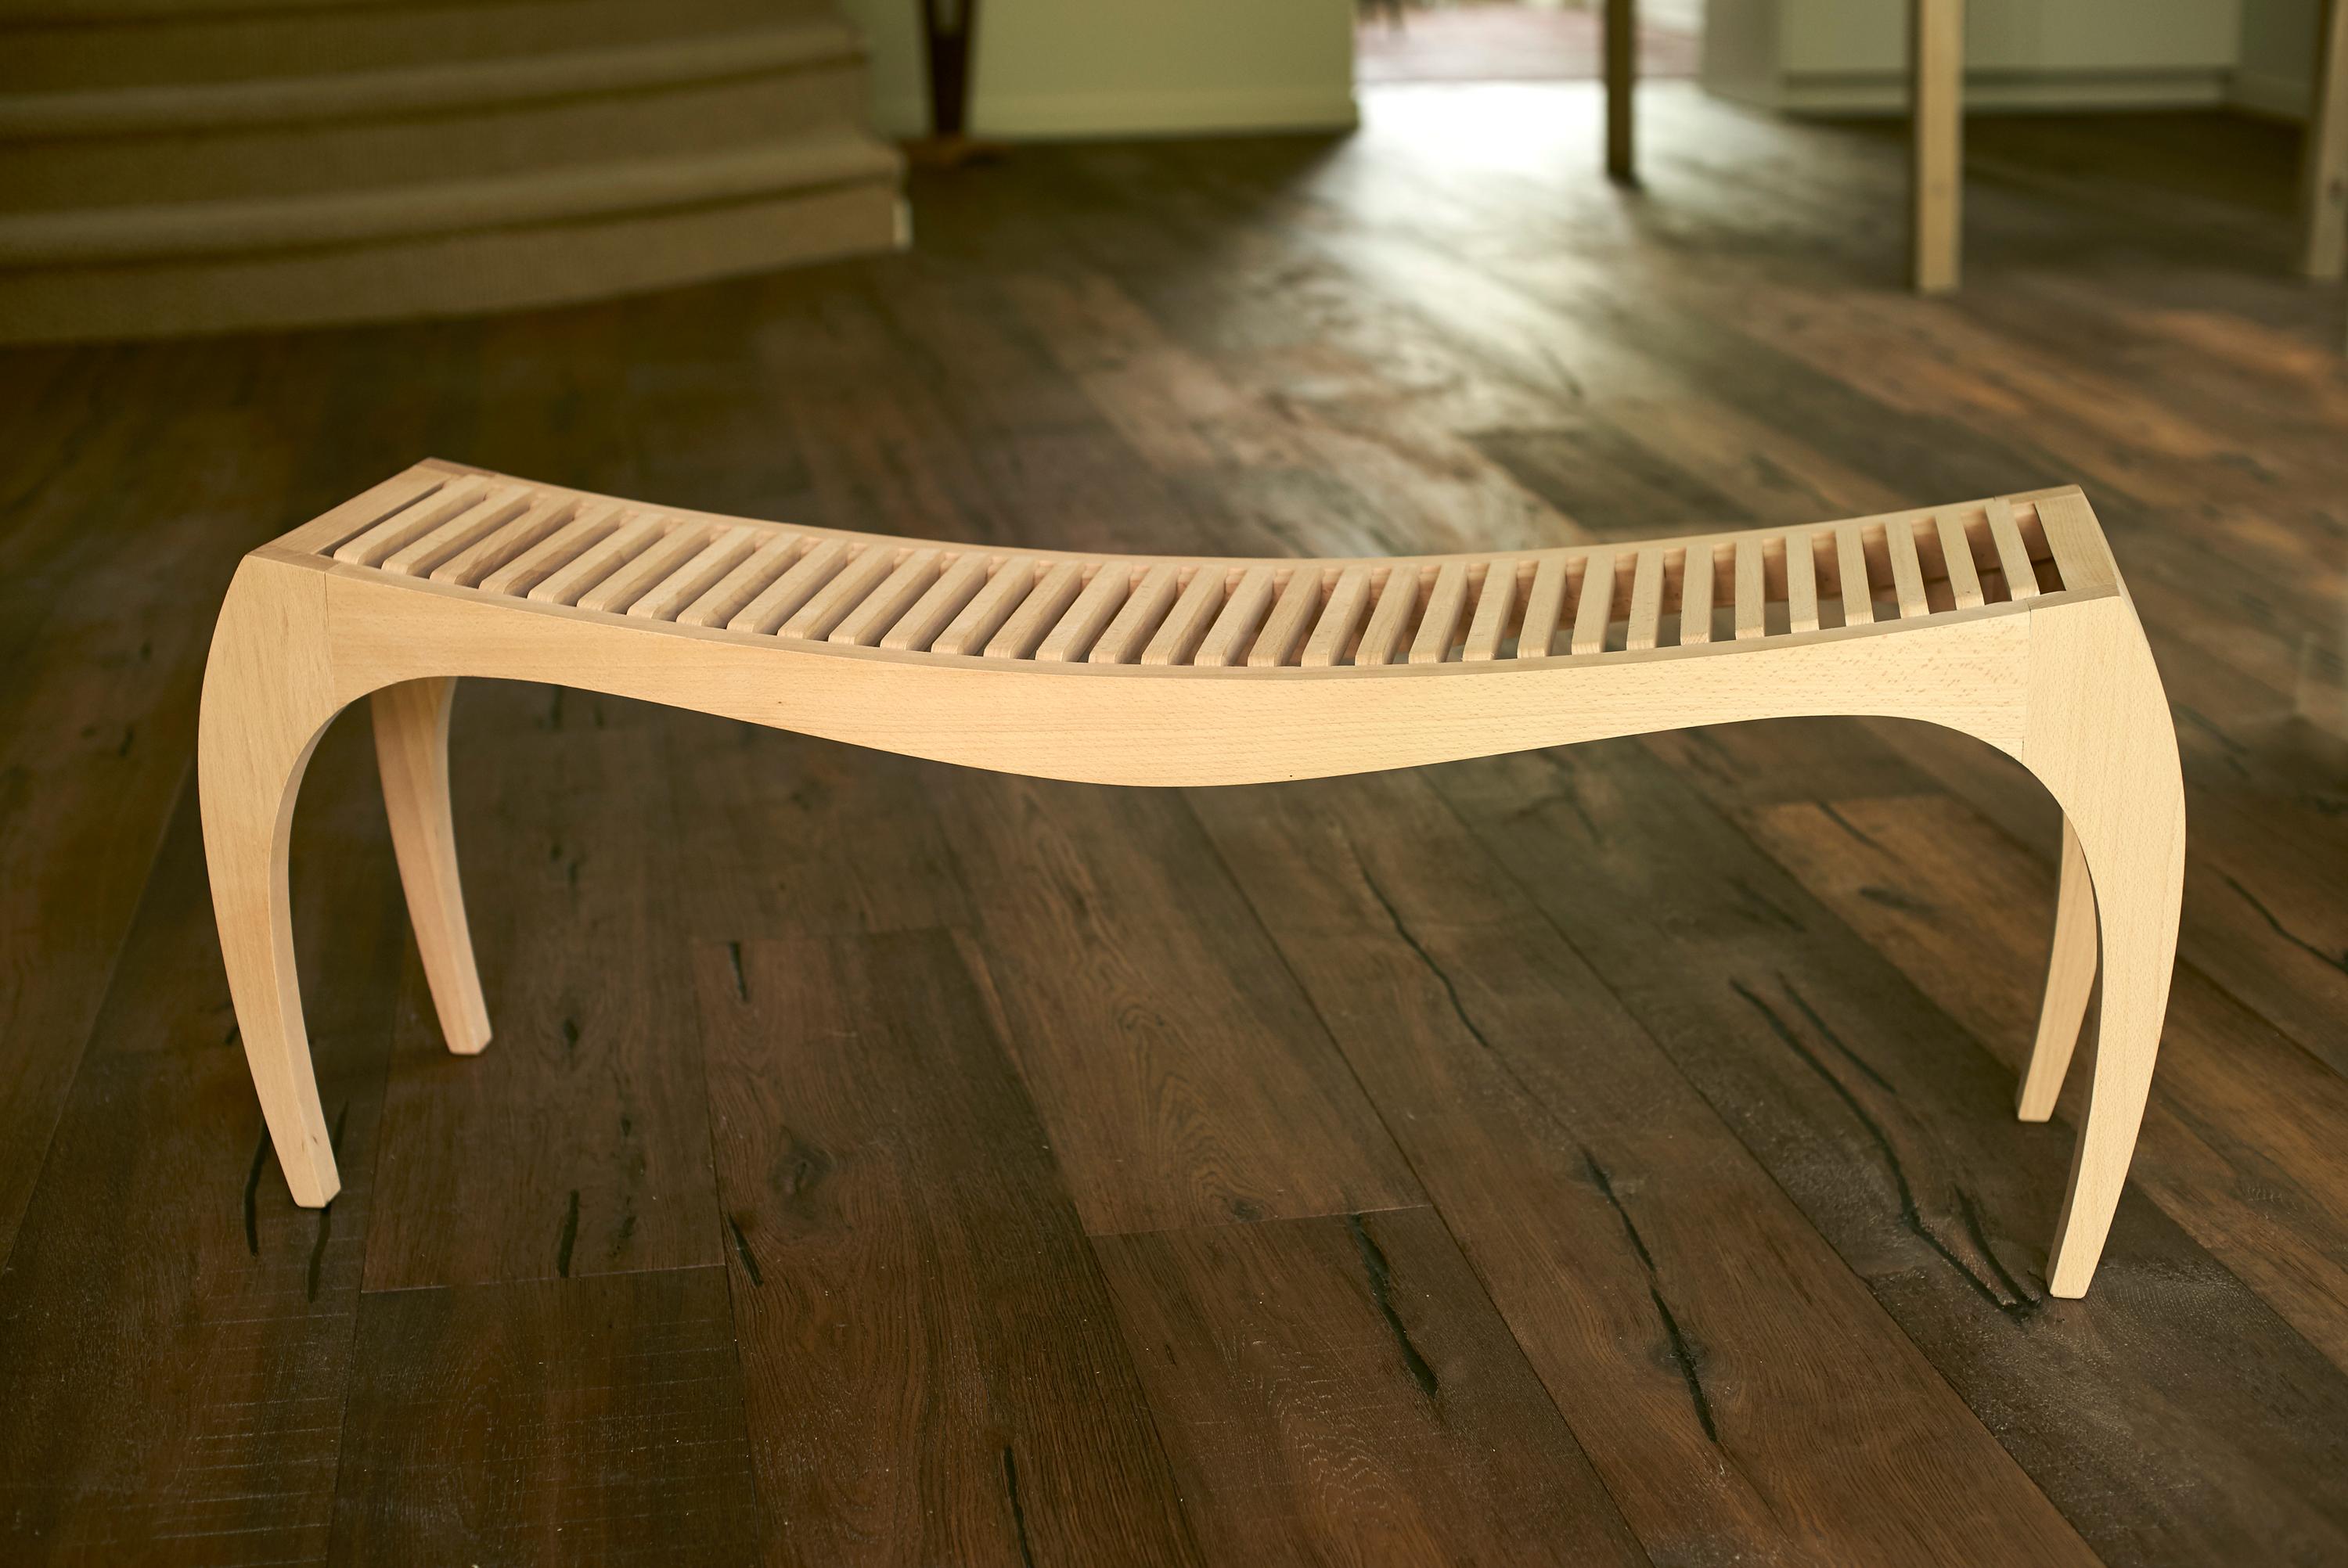 Rumbo bench by Jean-Baptiste Van den Heede
Unique piece
Signed and numbered
Dimensions: L 31 x W 118 x H 42 cm
Materials: mapple wood

Also available in solid cherrywood and other woods on demand.

The Rumbo bench is a unique design, limited